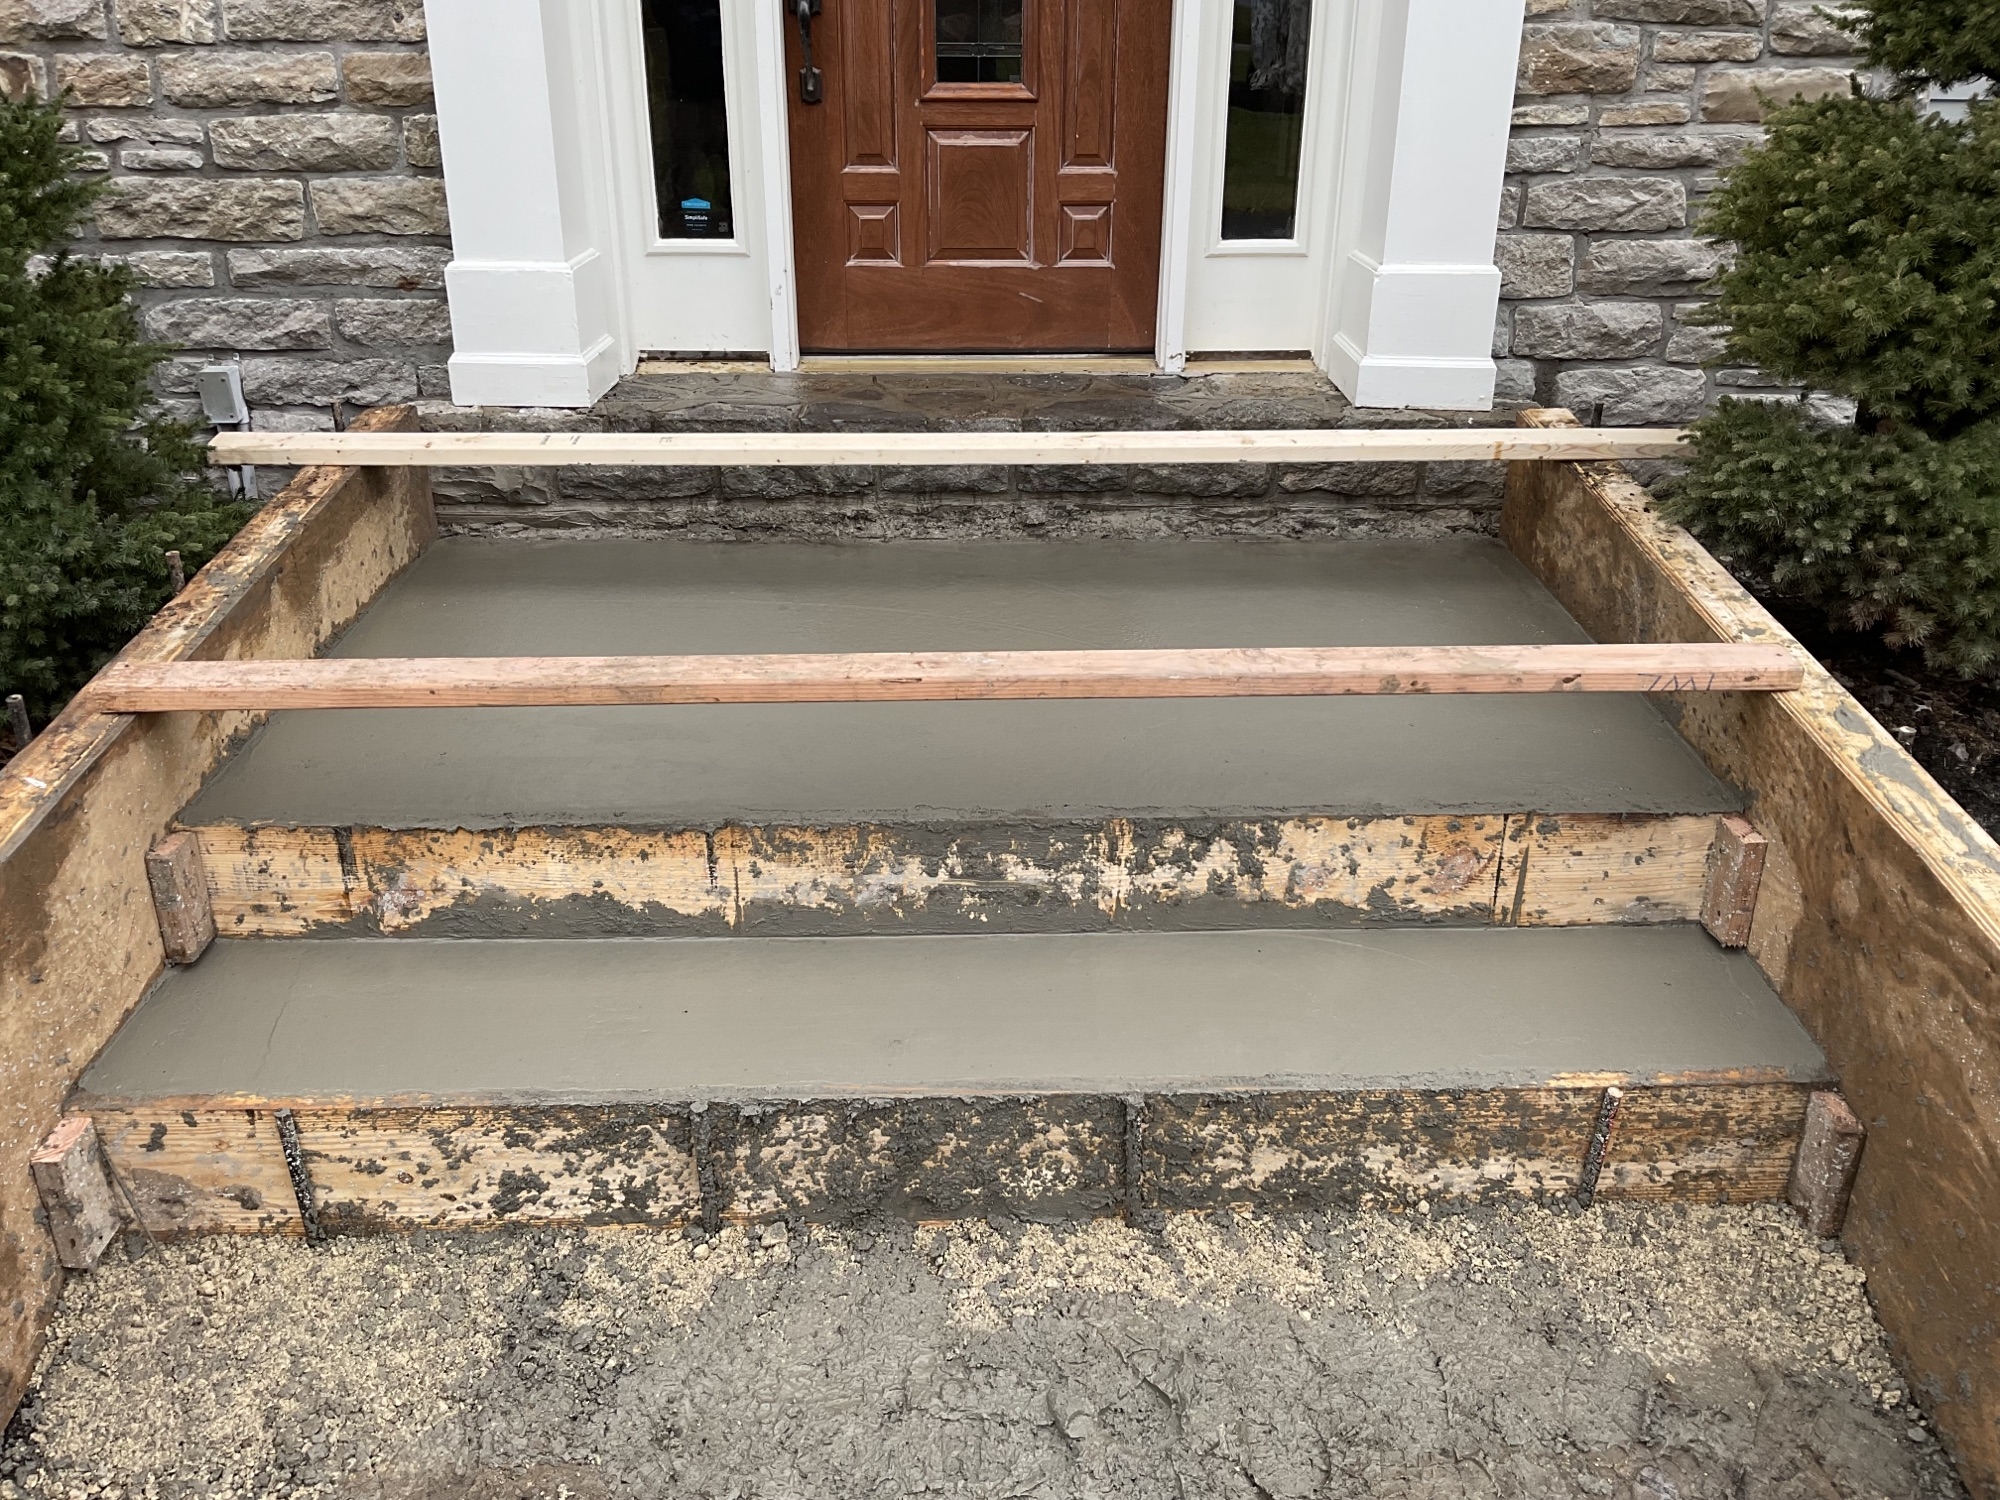 Front porch design companies Indian hill ohio